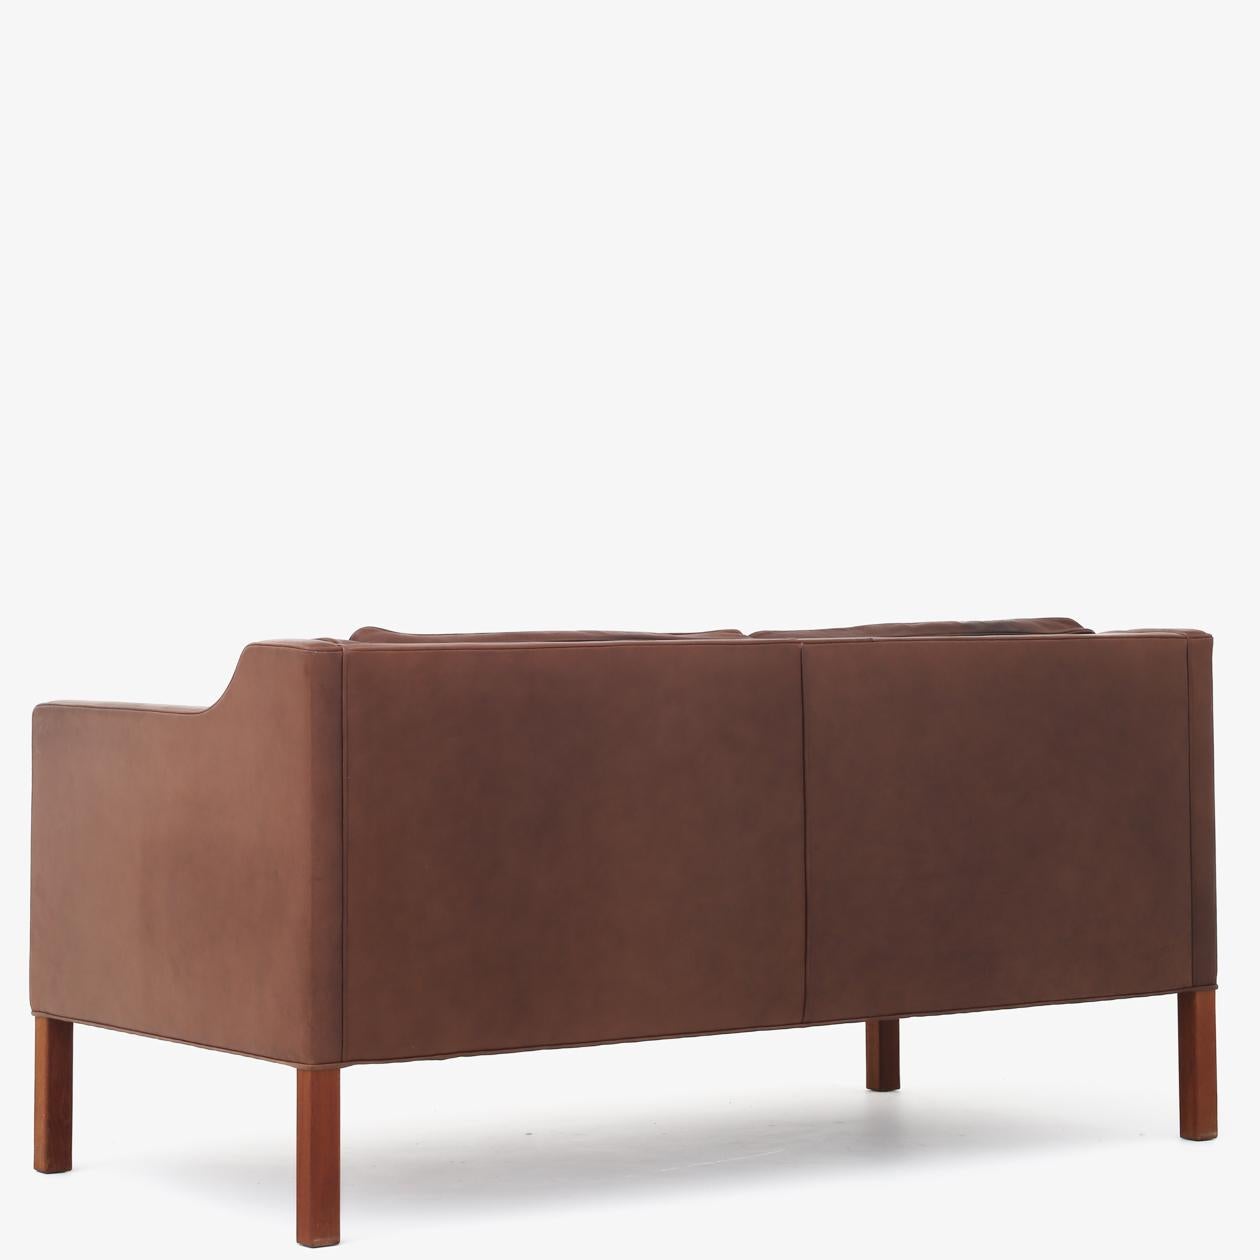 BM 2212 - 2 seater sofa in patinated brown leather on teak legs. Børge Mogensen / Fredericia Furniture.